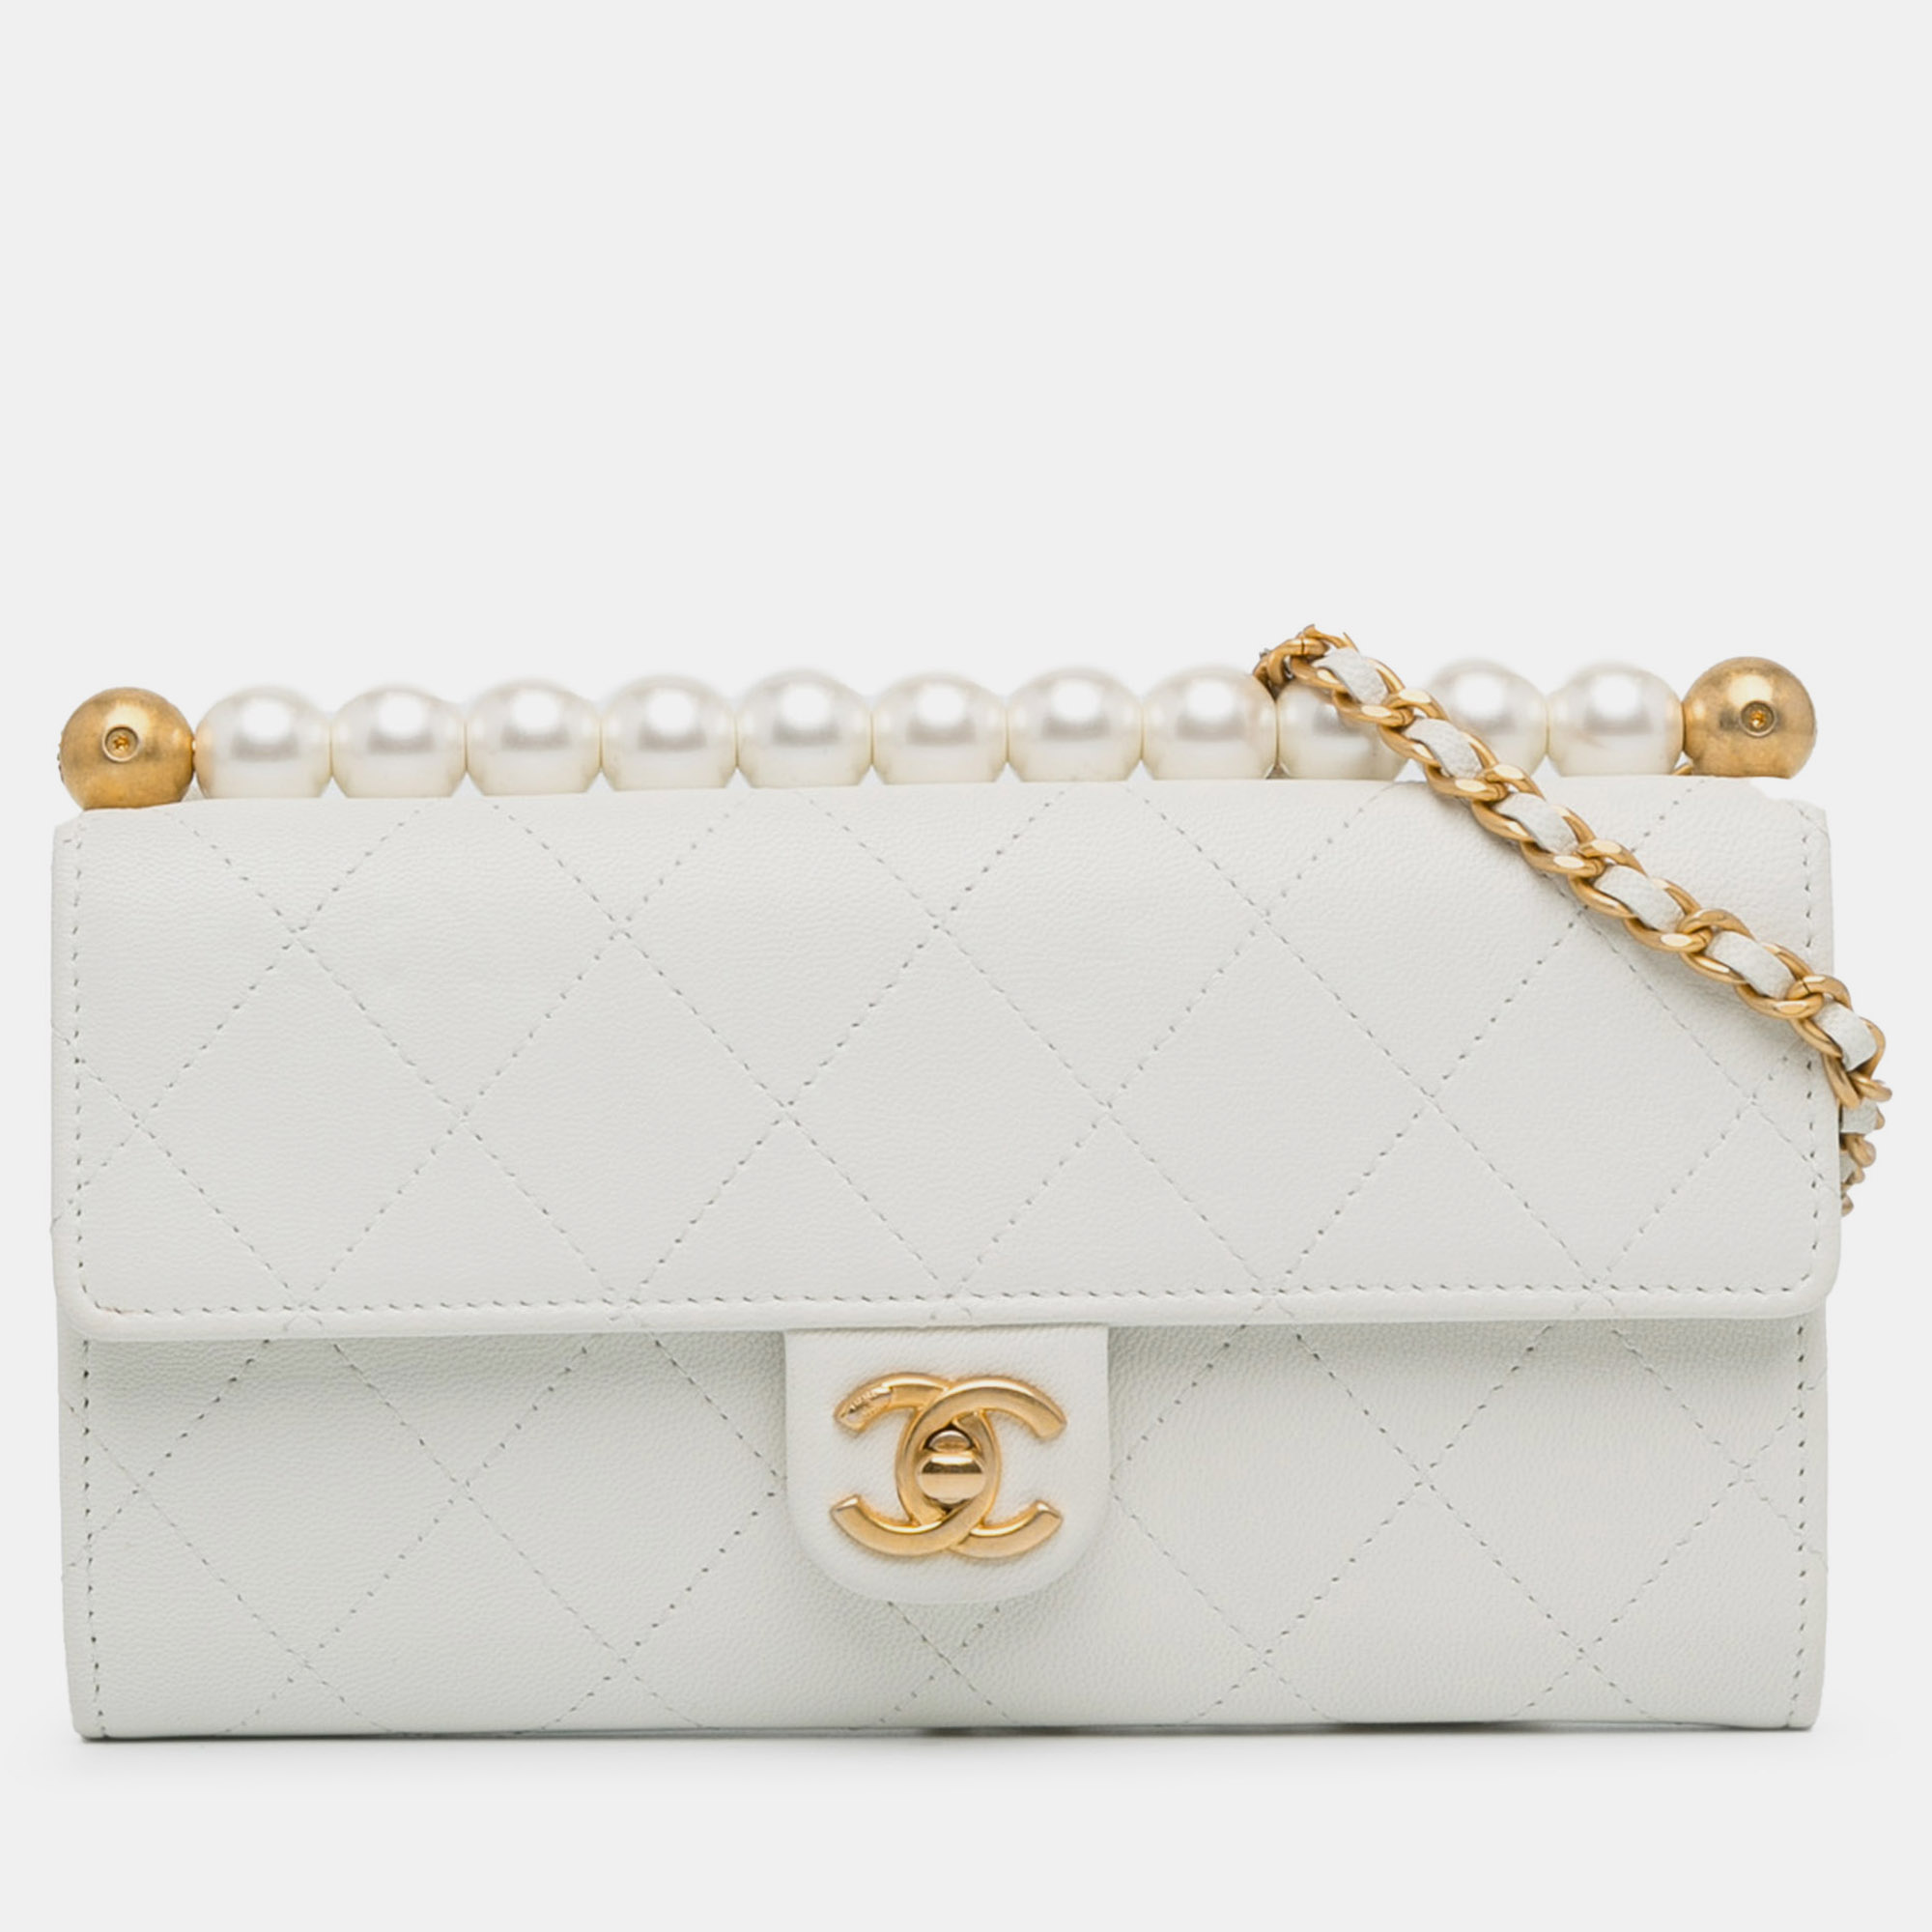 Chanel goatskin chic pearls wallet on chain